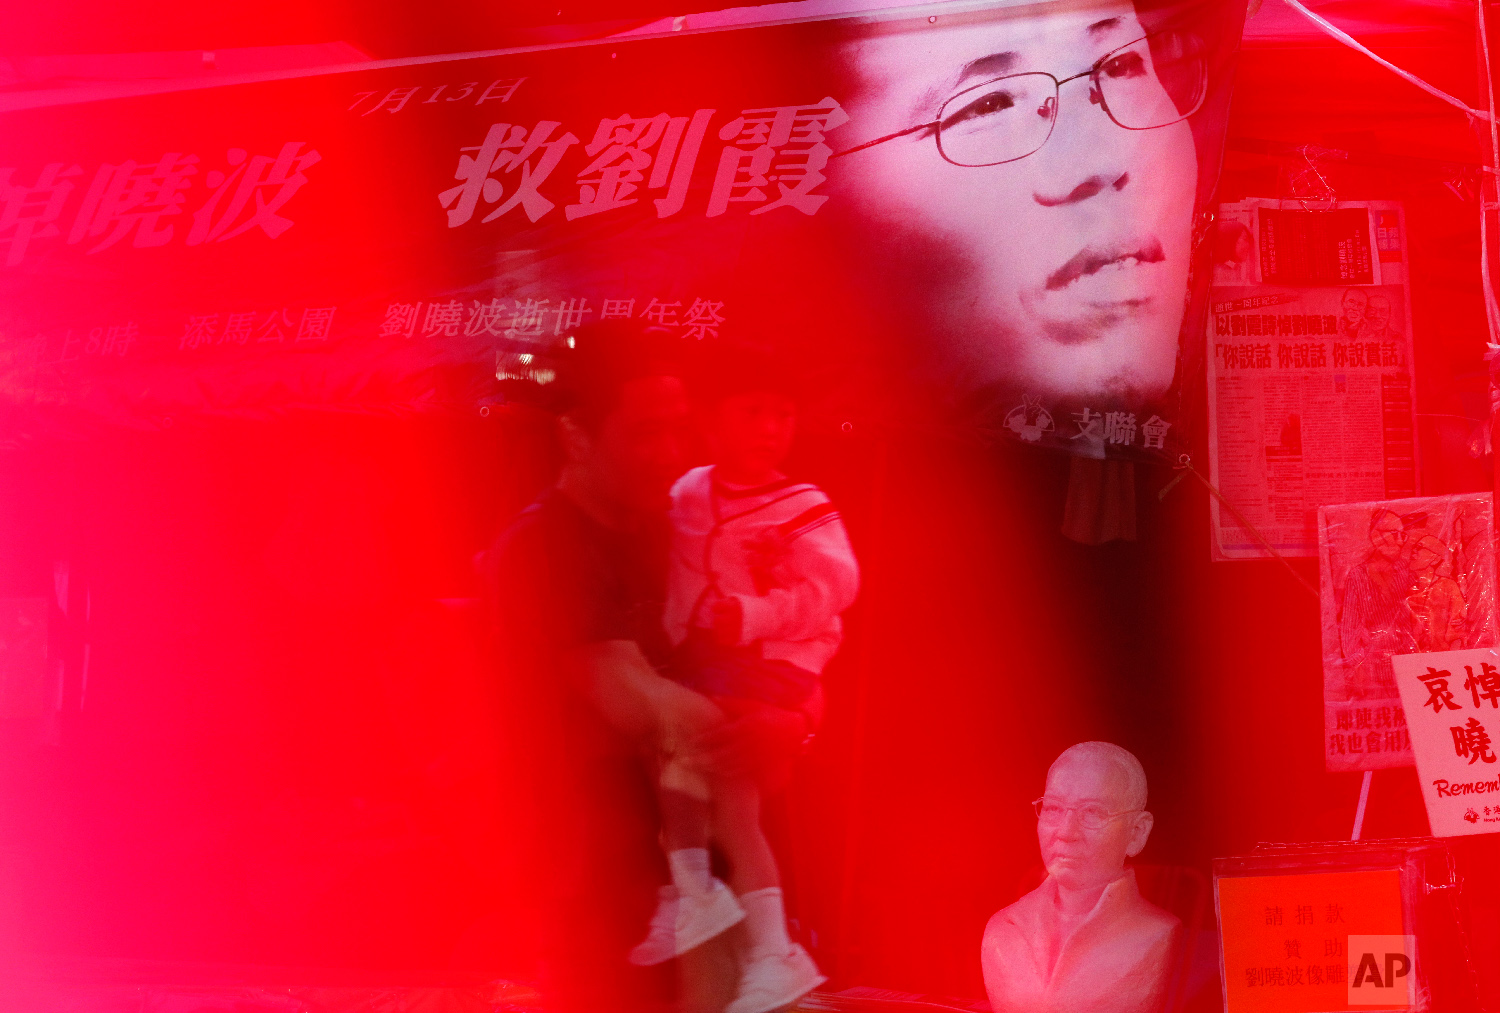  An image of Liu Xia, wife of the late Nobel Peace Laureate Liu Xiaobo, is displayed at a booth to collect signatures from the public in releasing of her at a down town street in Hong Kong on July 10, 2018. (AP Photo/Vincent Yu) 